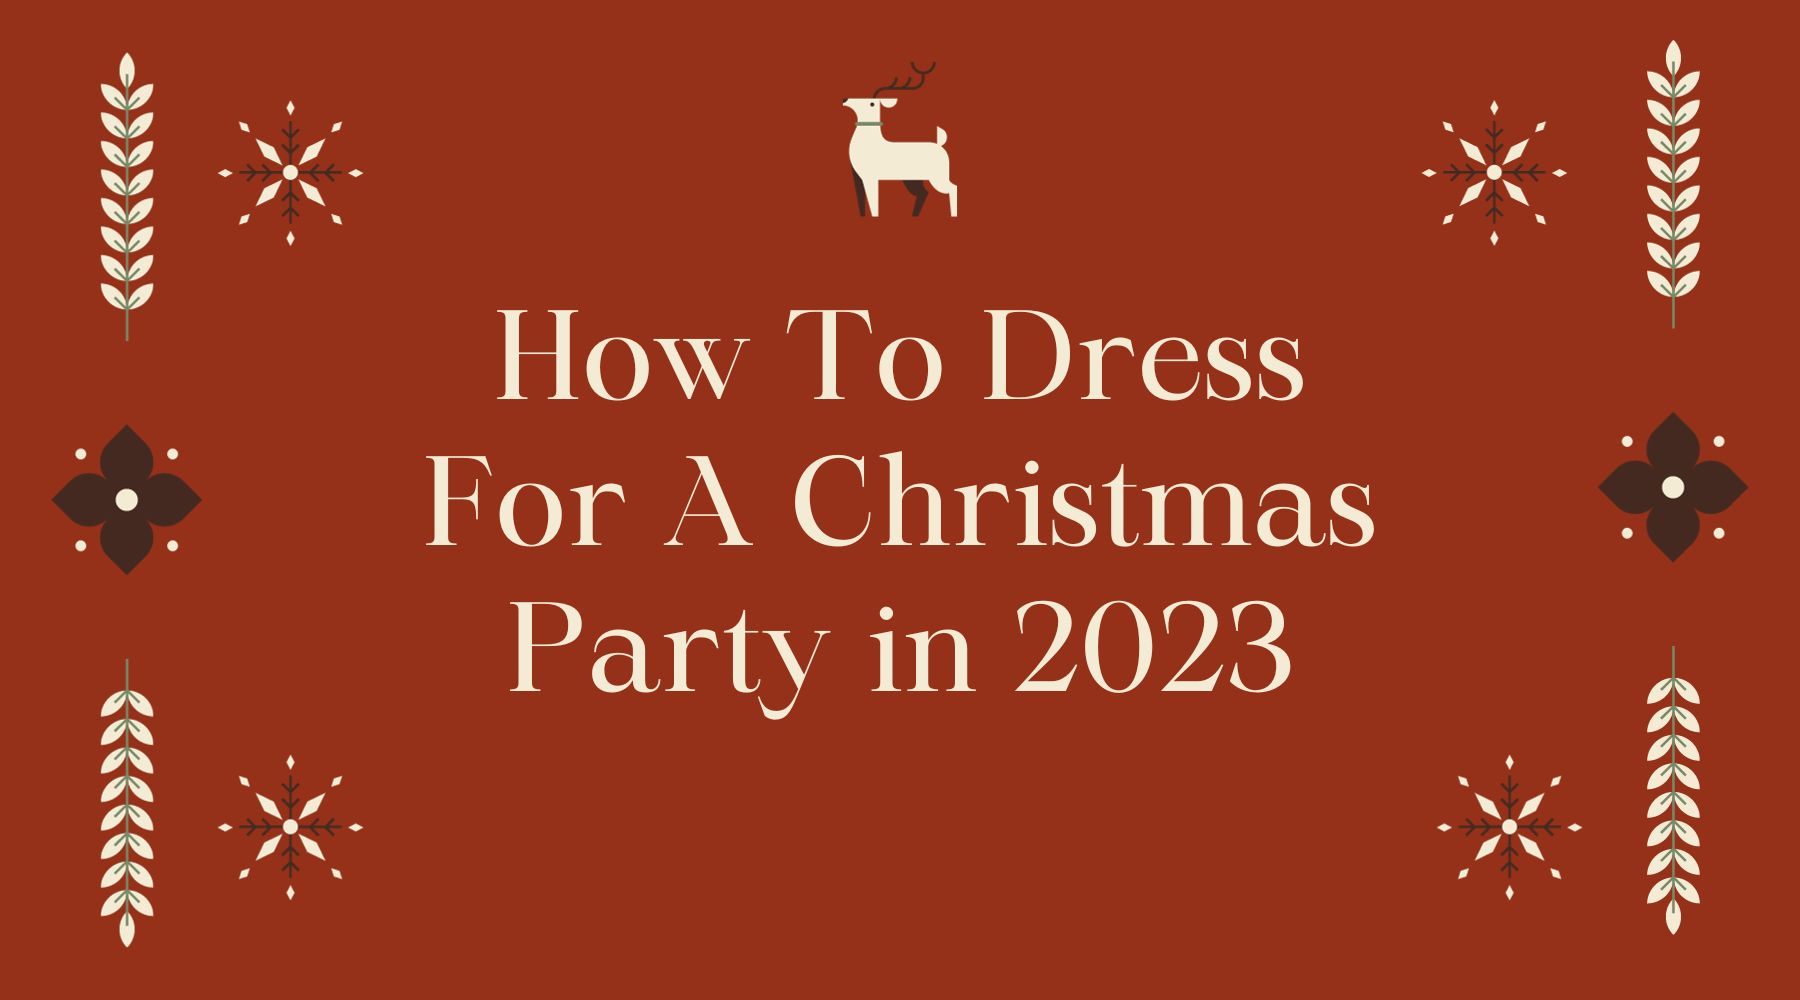 How To Dress For A Christmas Party in 2023